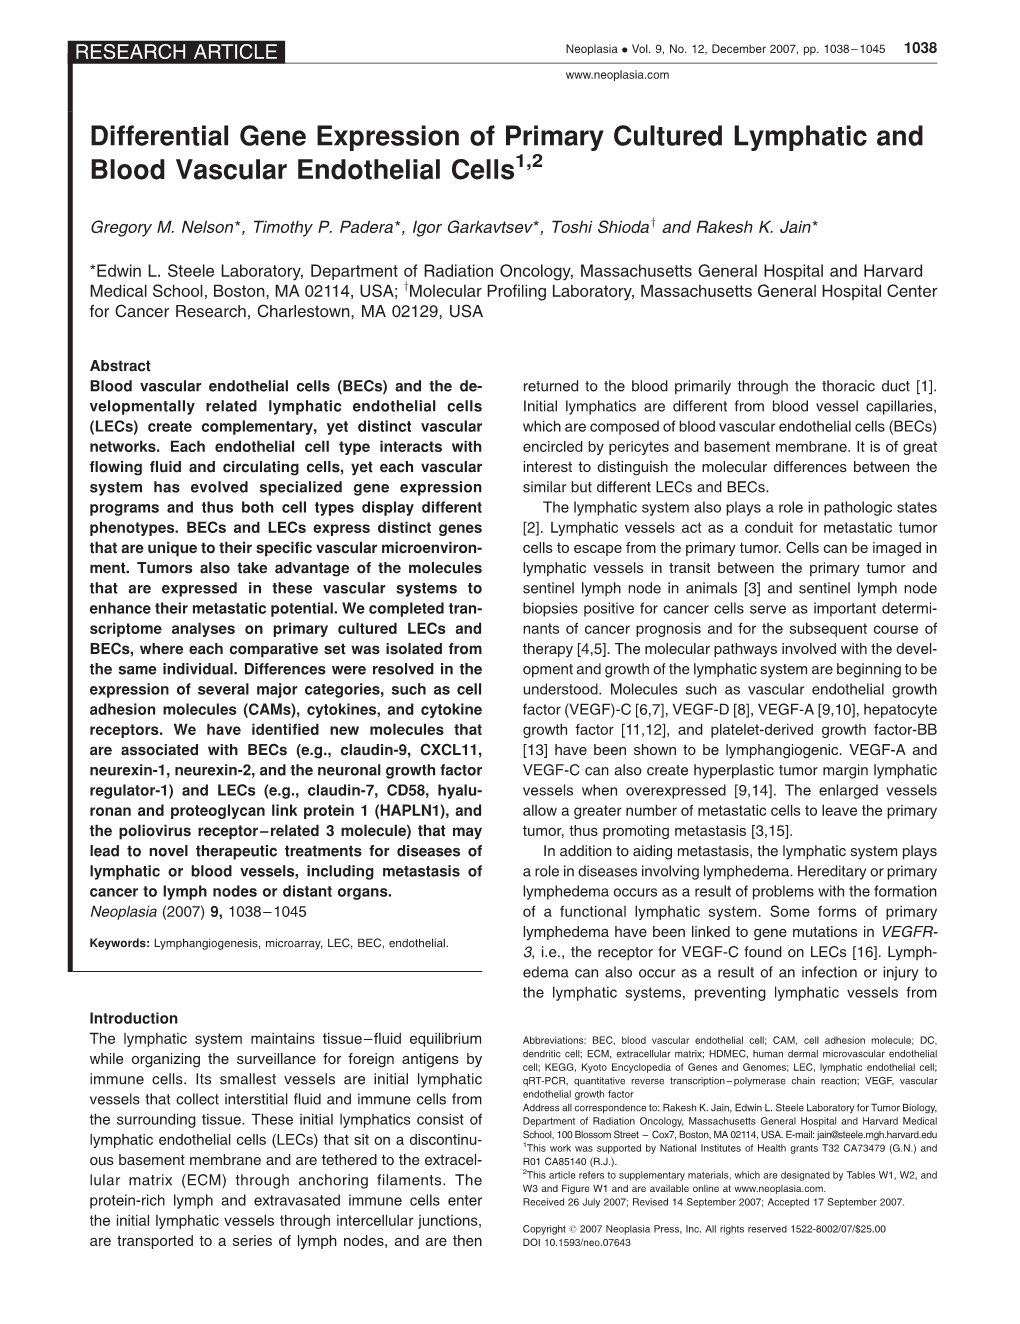 Differential Gene Expression of Primary Cultured Lymphatic and Blood Vascular Endothelial Cells1,2